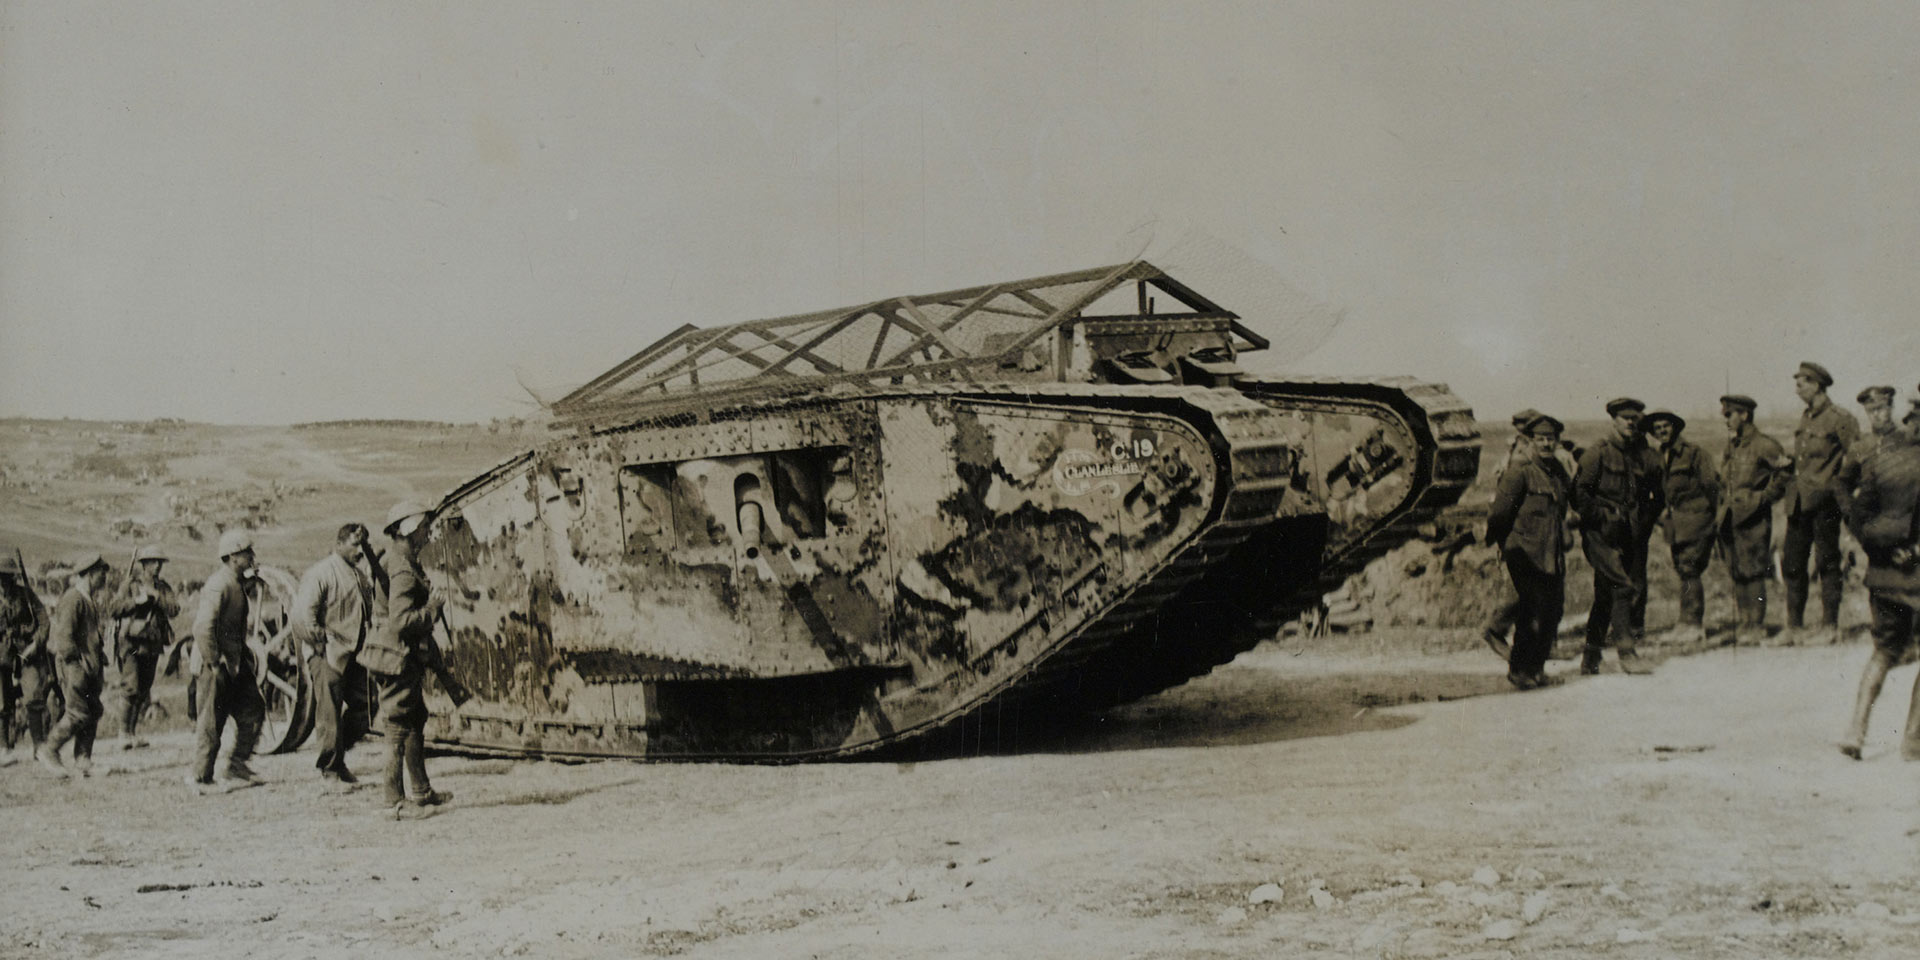 tanks were first used during this 4 month battle